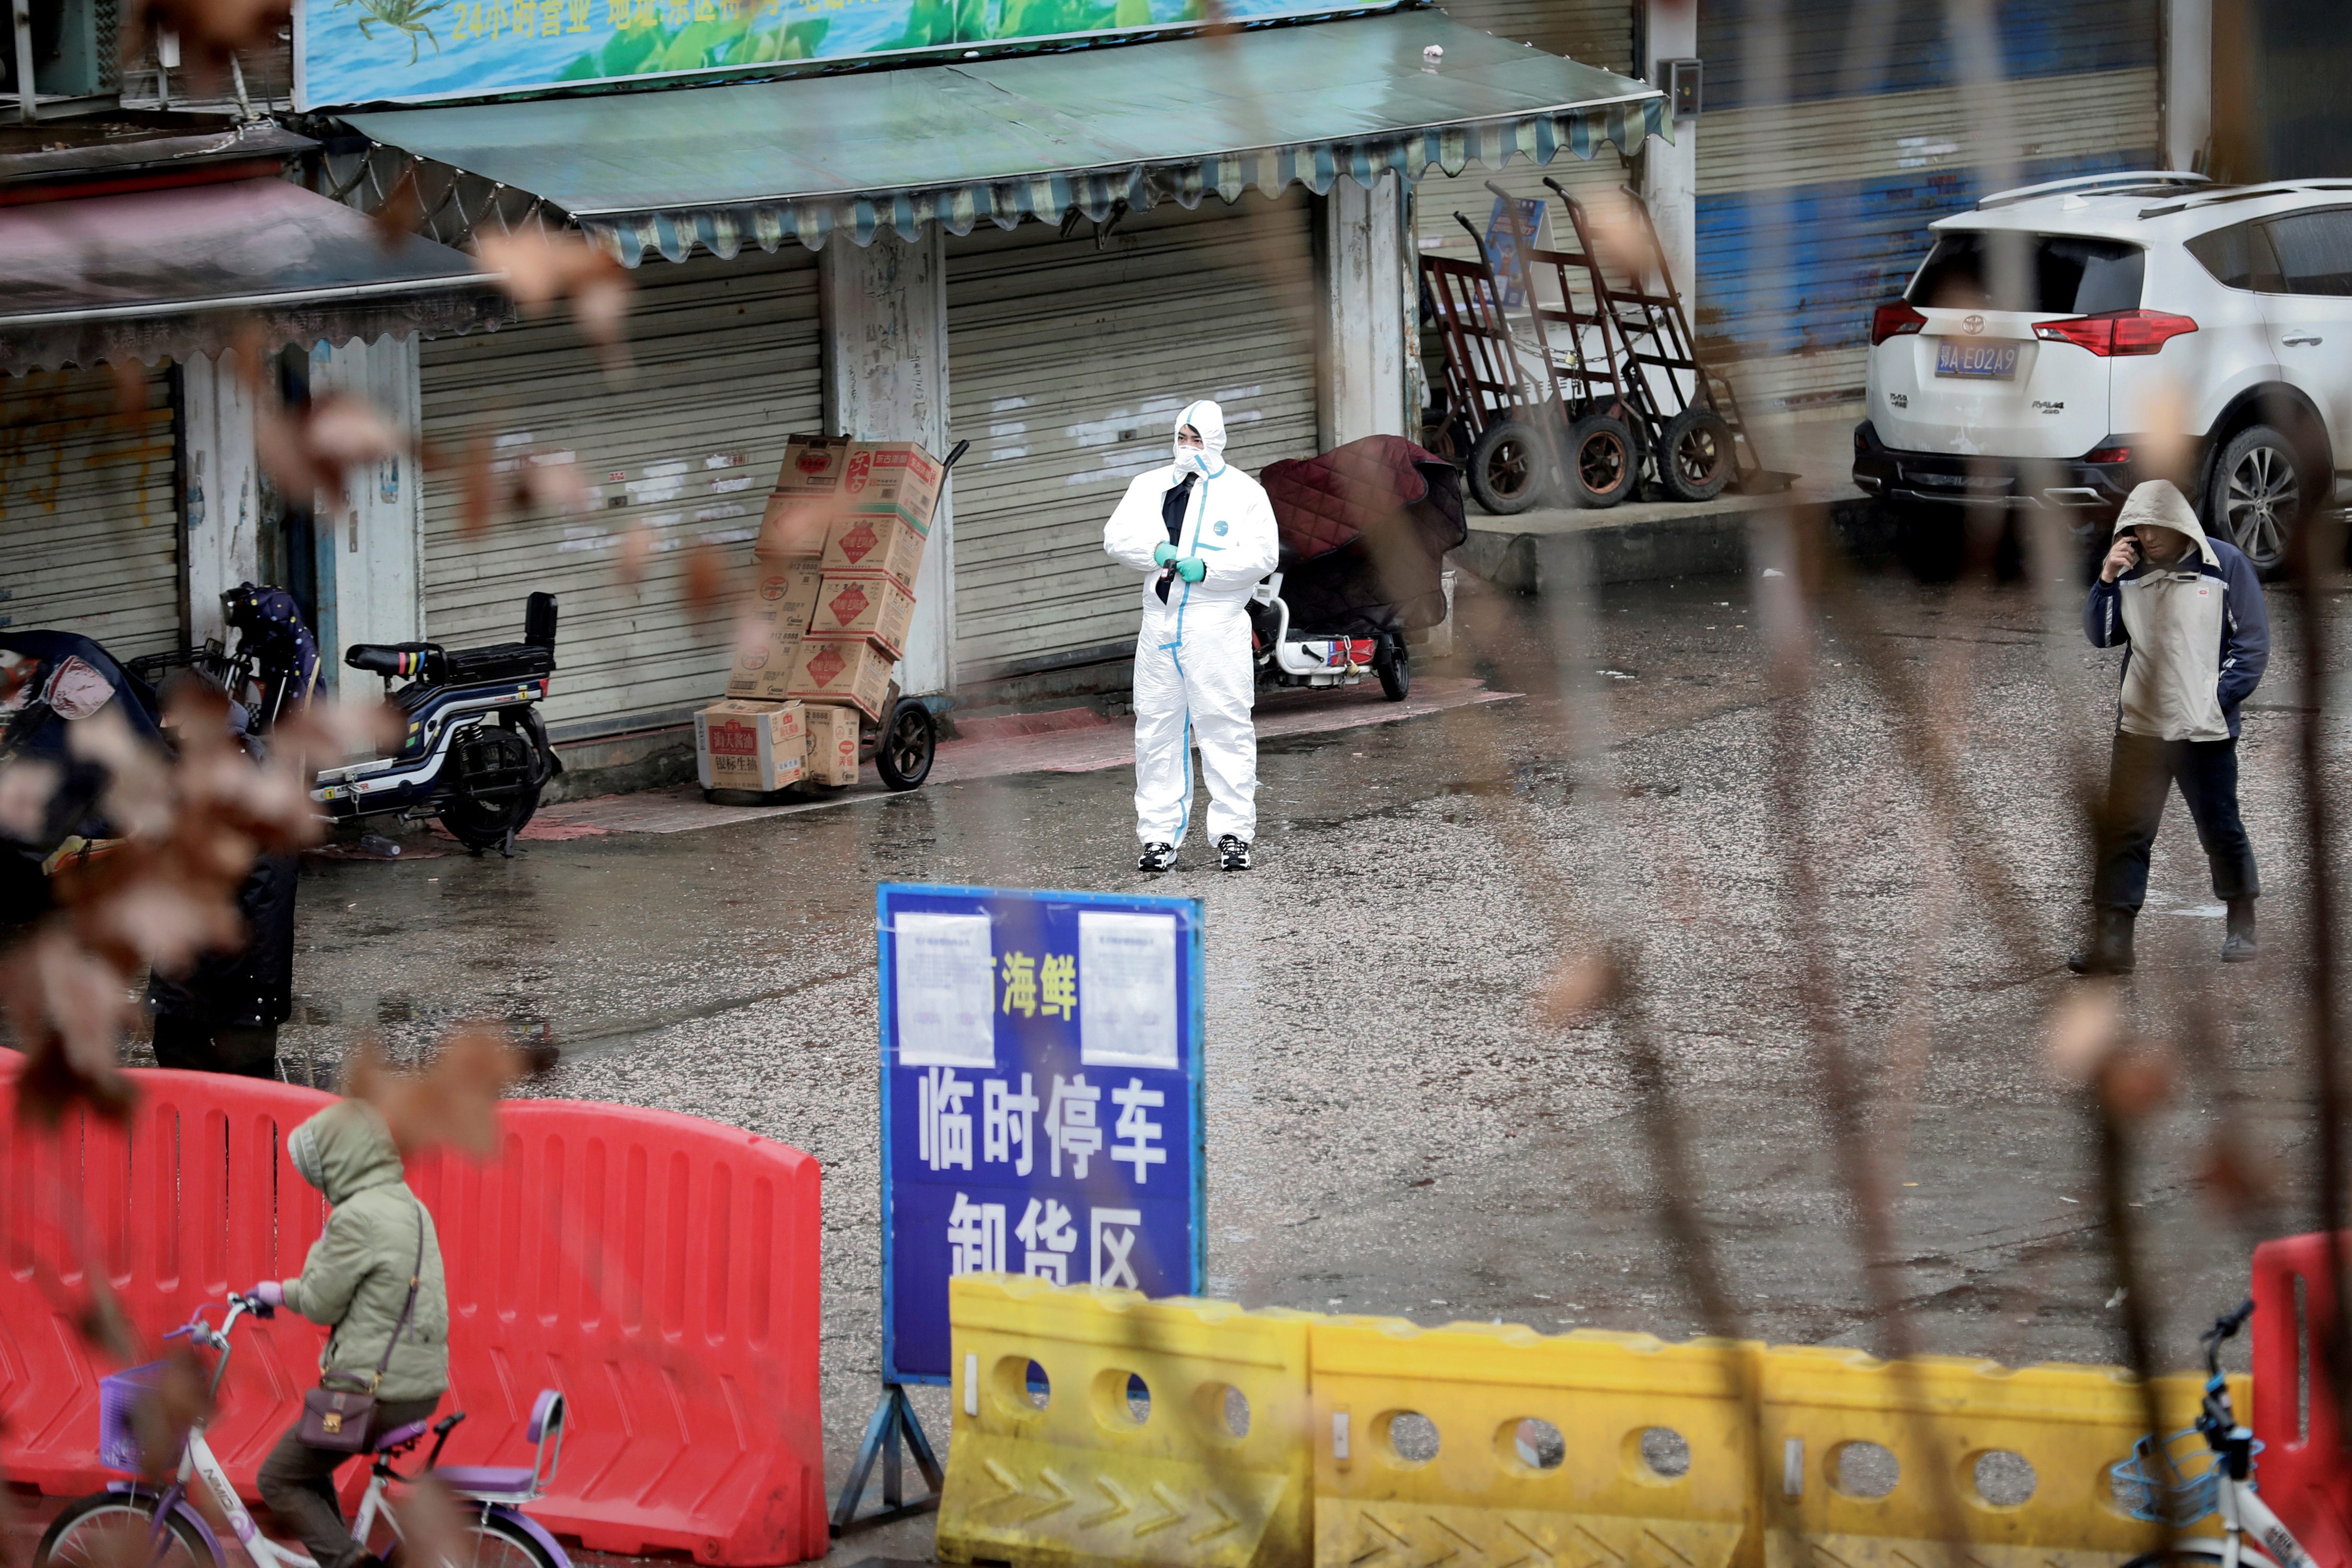 Independent pandemic review panel critical of China, WHO delays